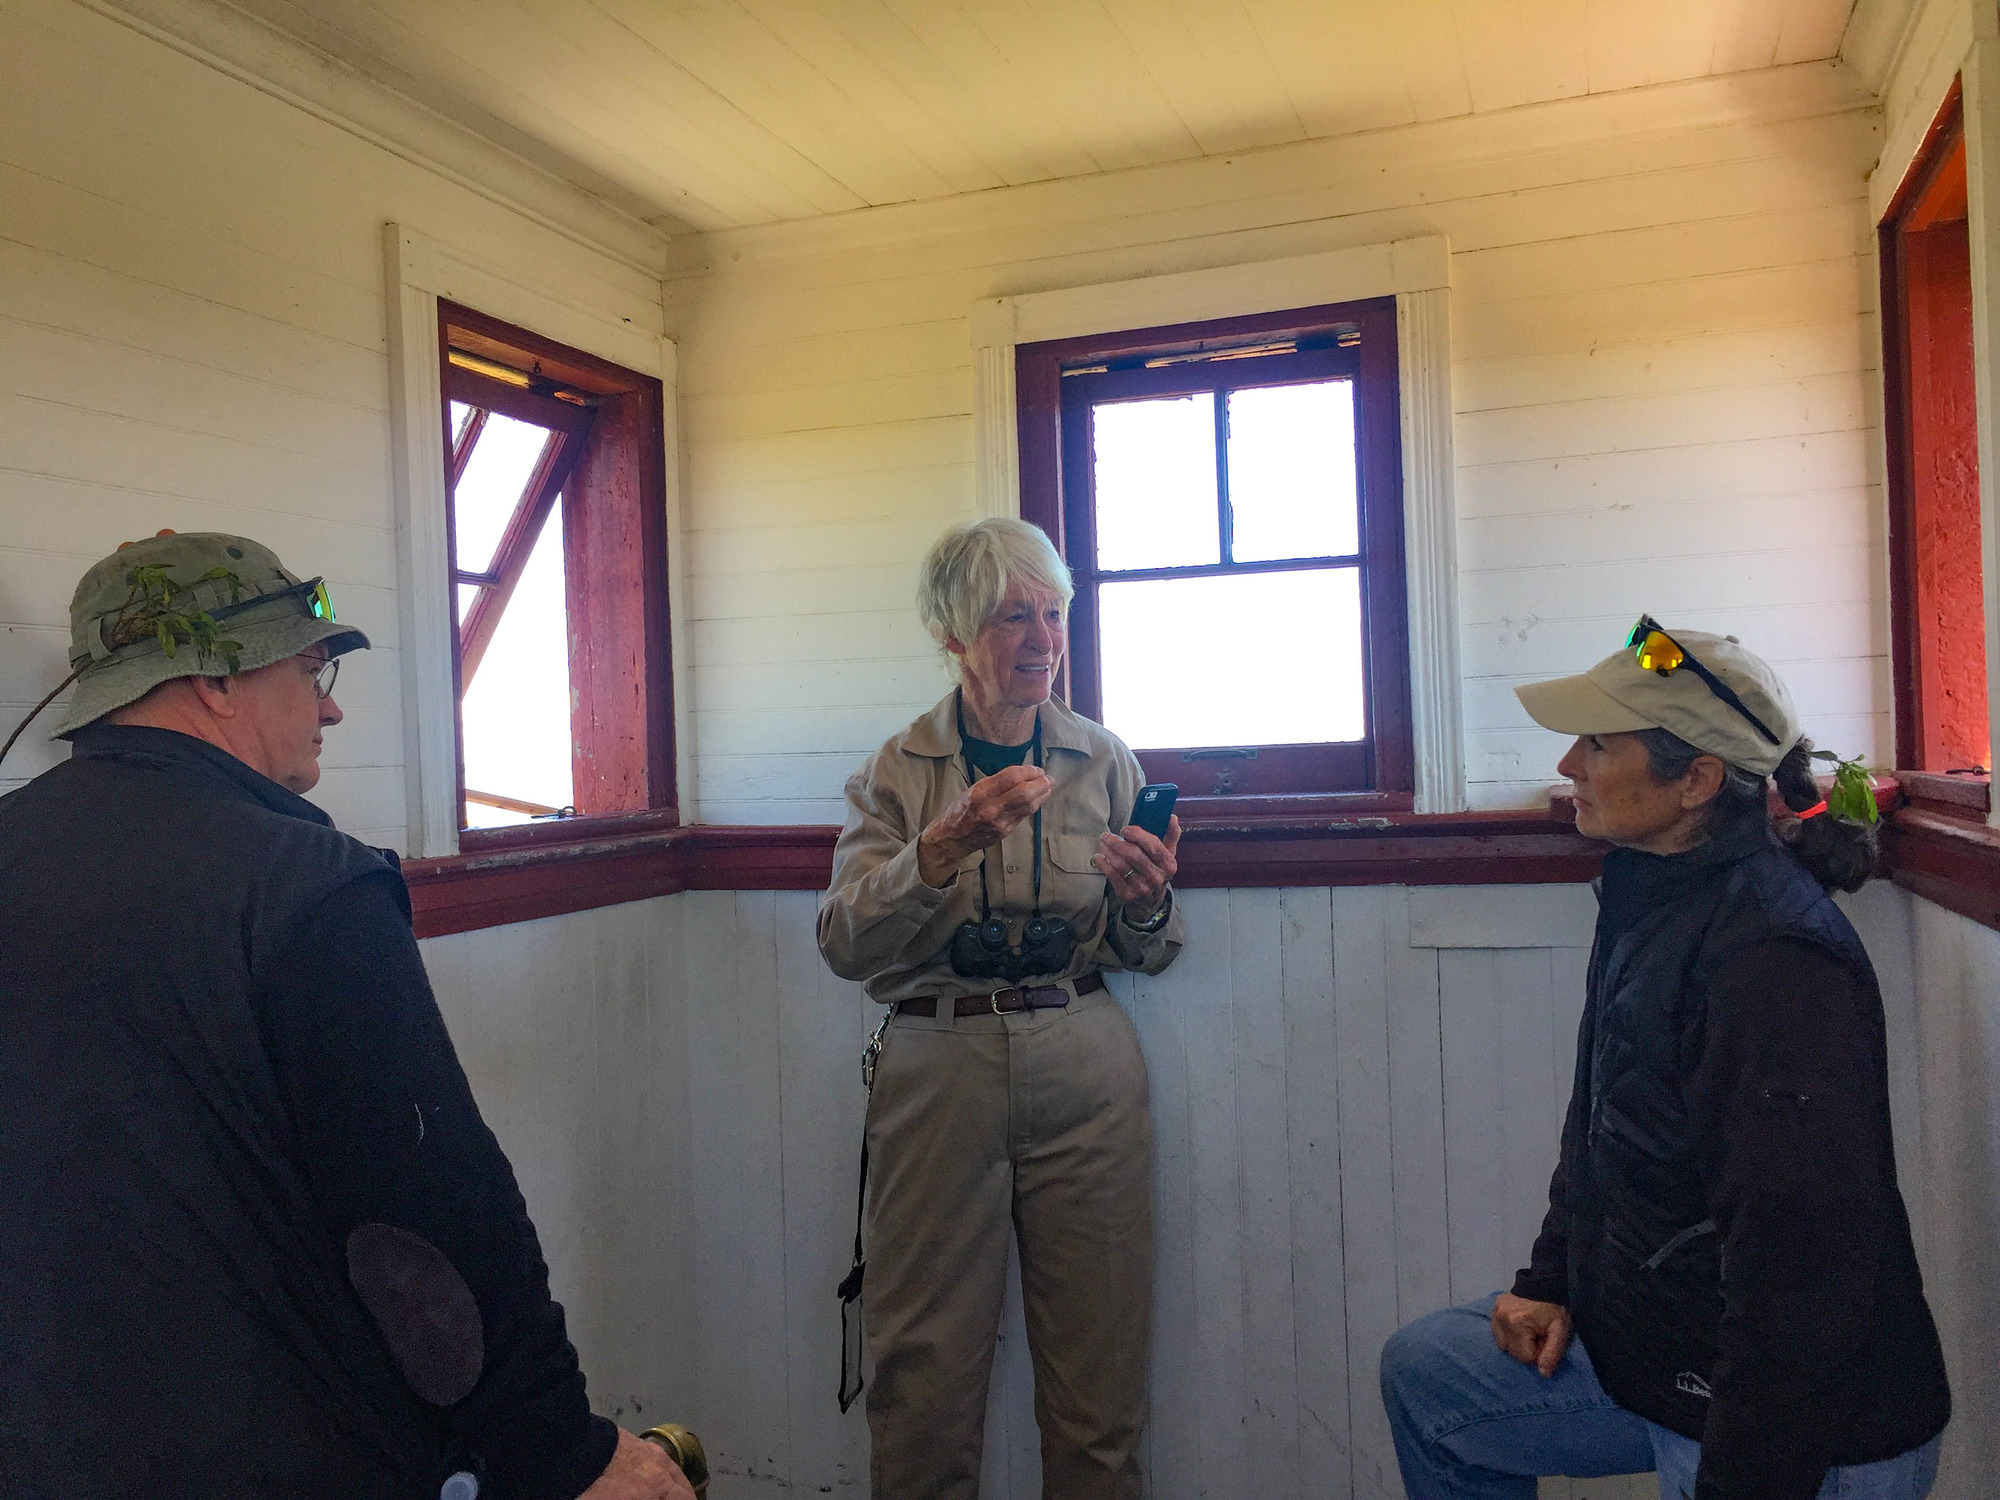 Volunteer talking to visitors in a small room